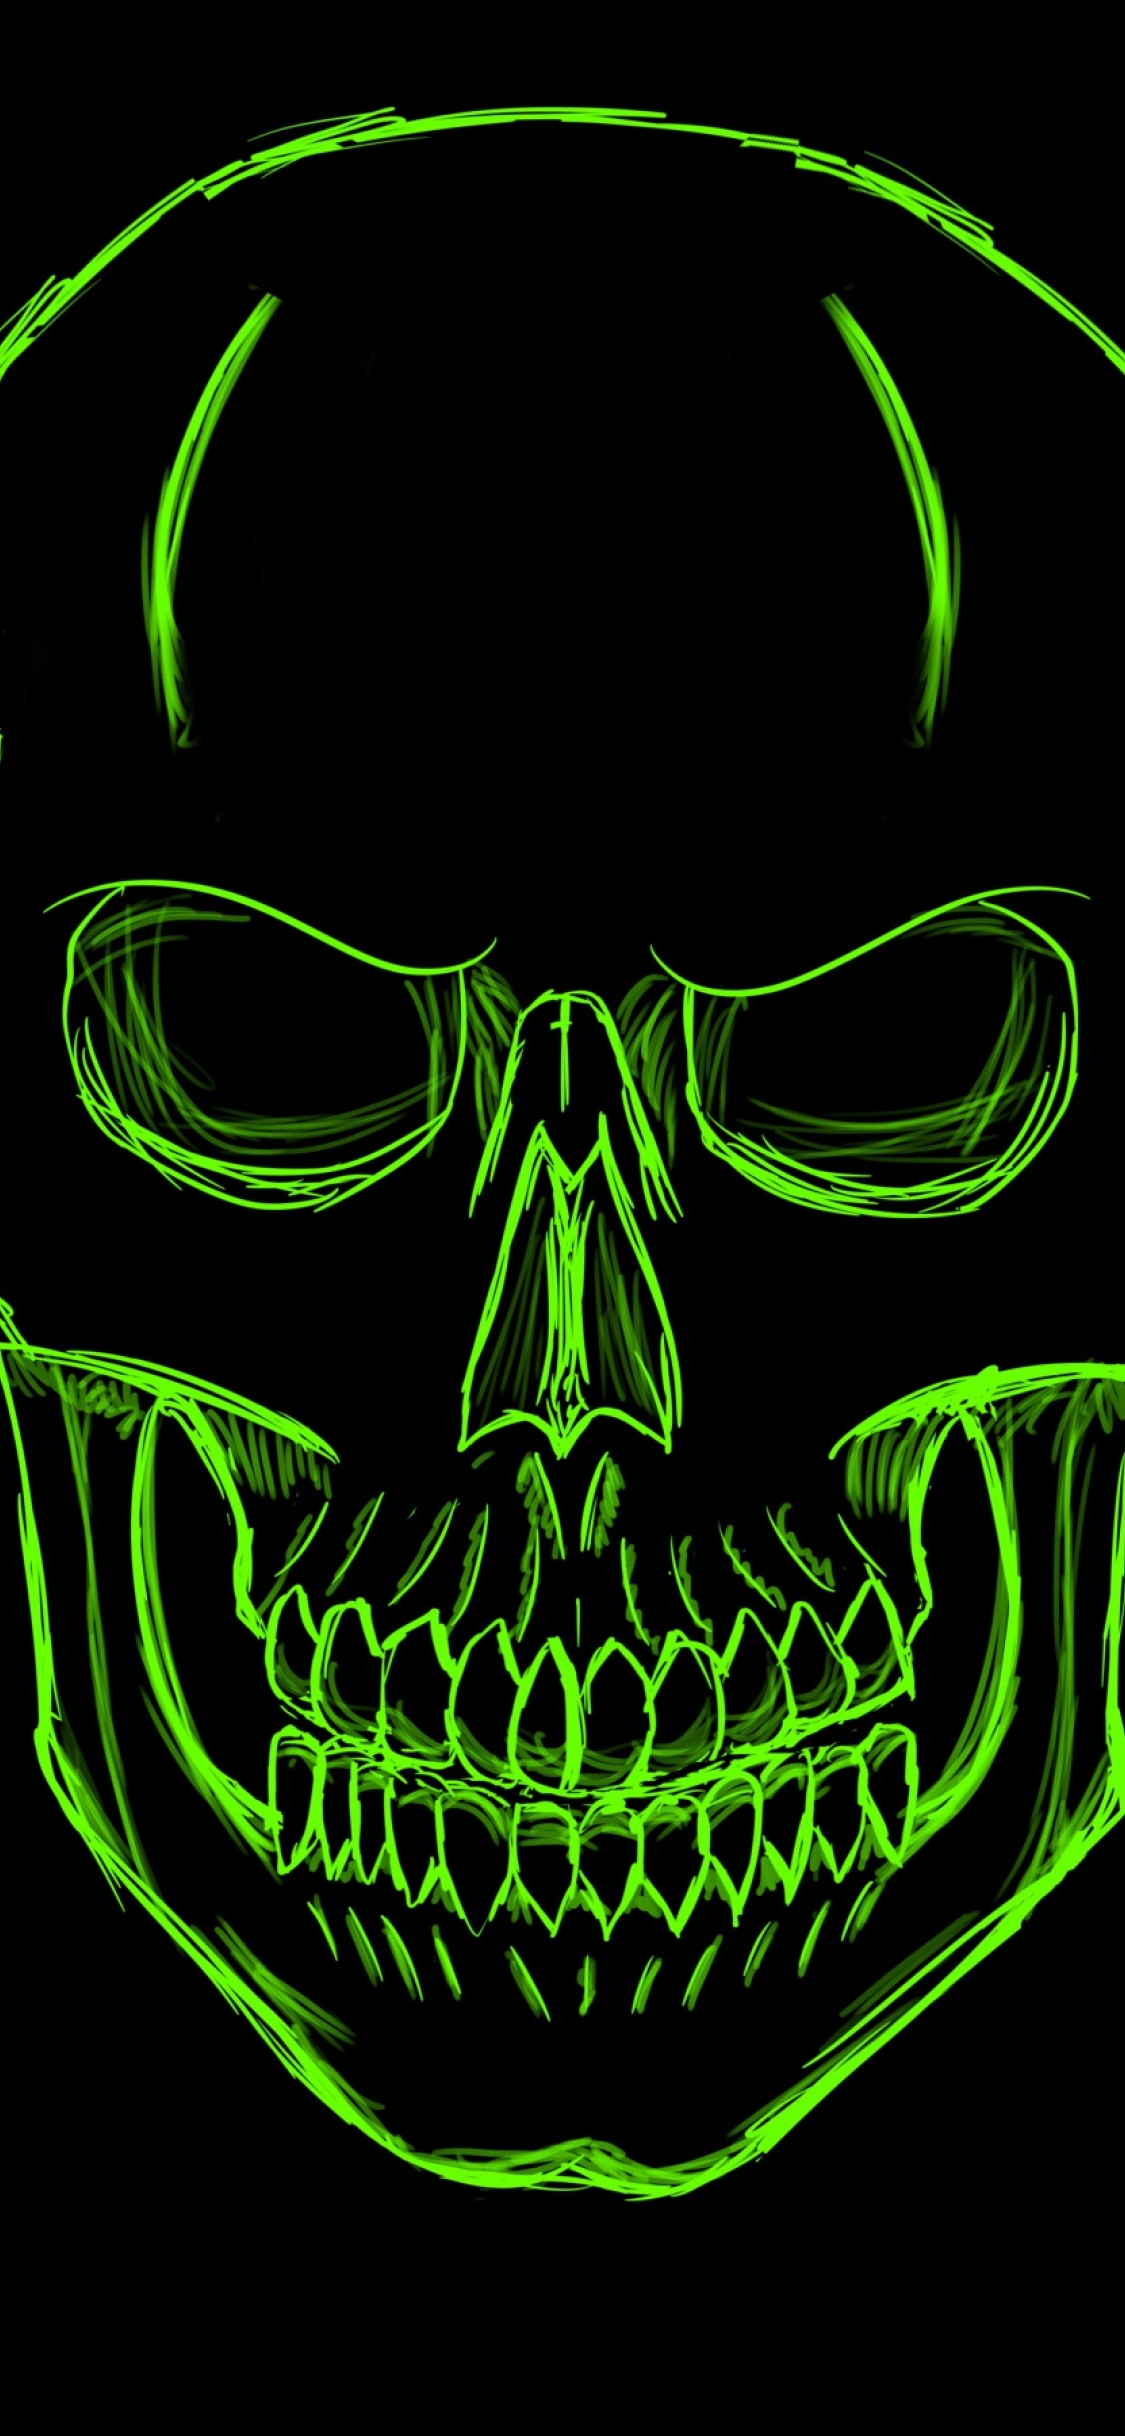 Green skull wallpaper for iPhone. Download it on your device and make it your wallpaper. - Skeleton, skull